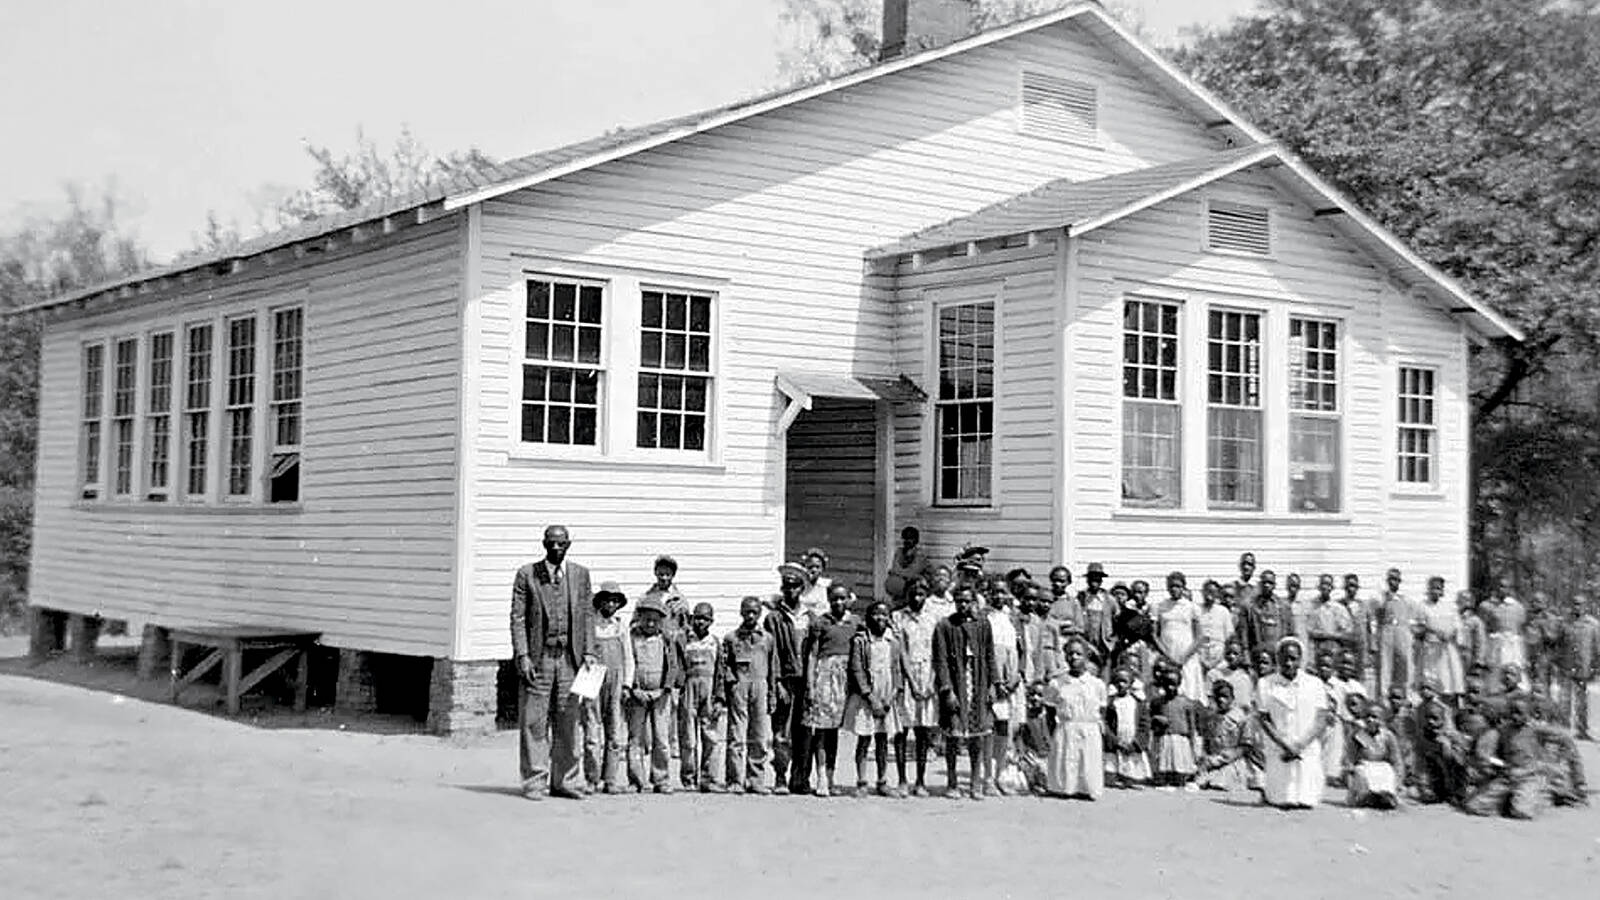 <p class="p1"><span class="s1">Students gather </span>in front of the Pee Dee Rosenwald Colored School (as it was then called) in South Carolina.</p>